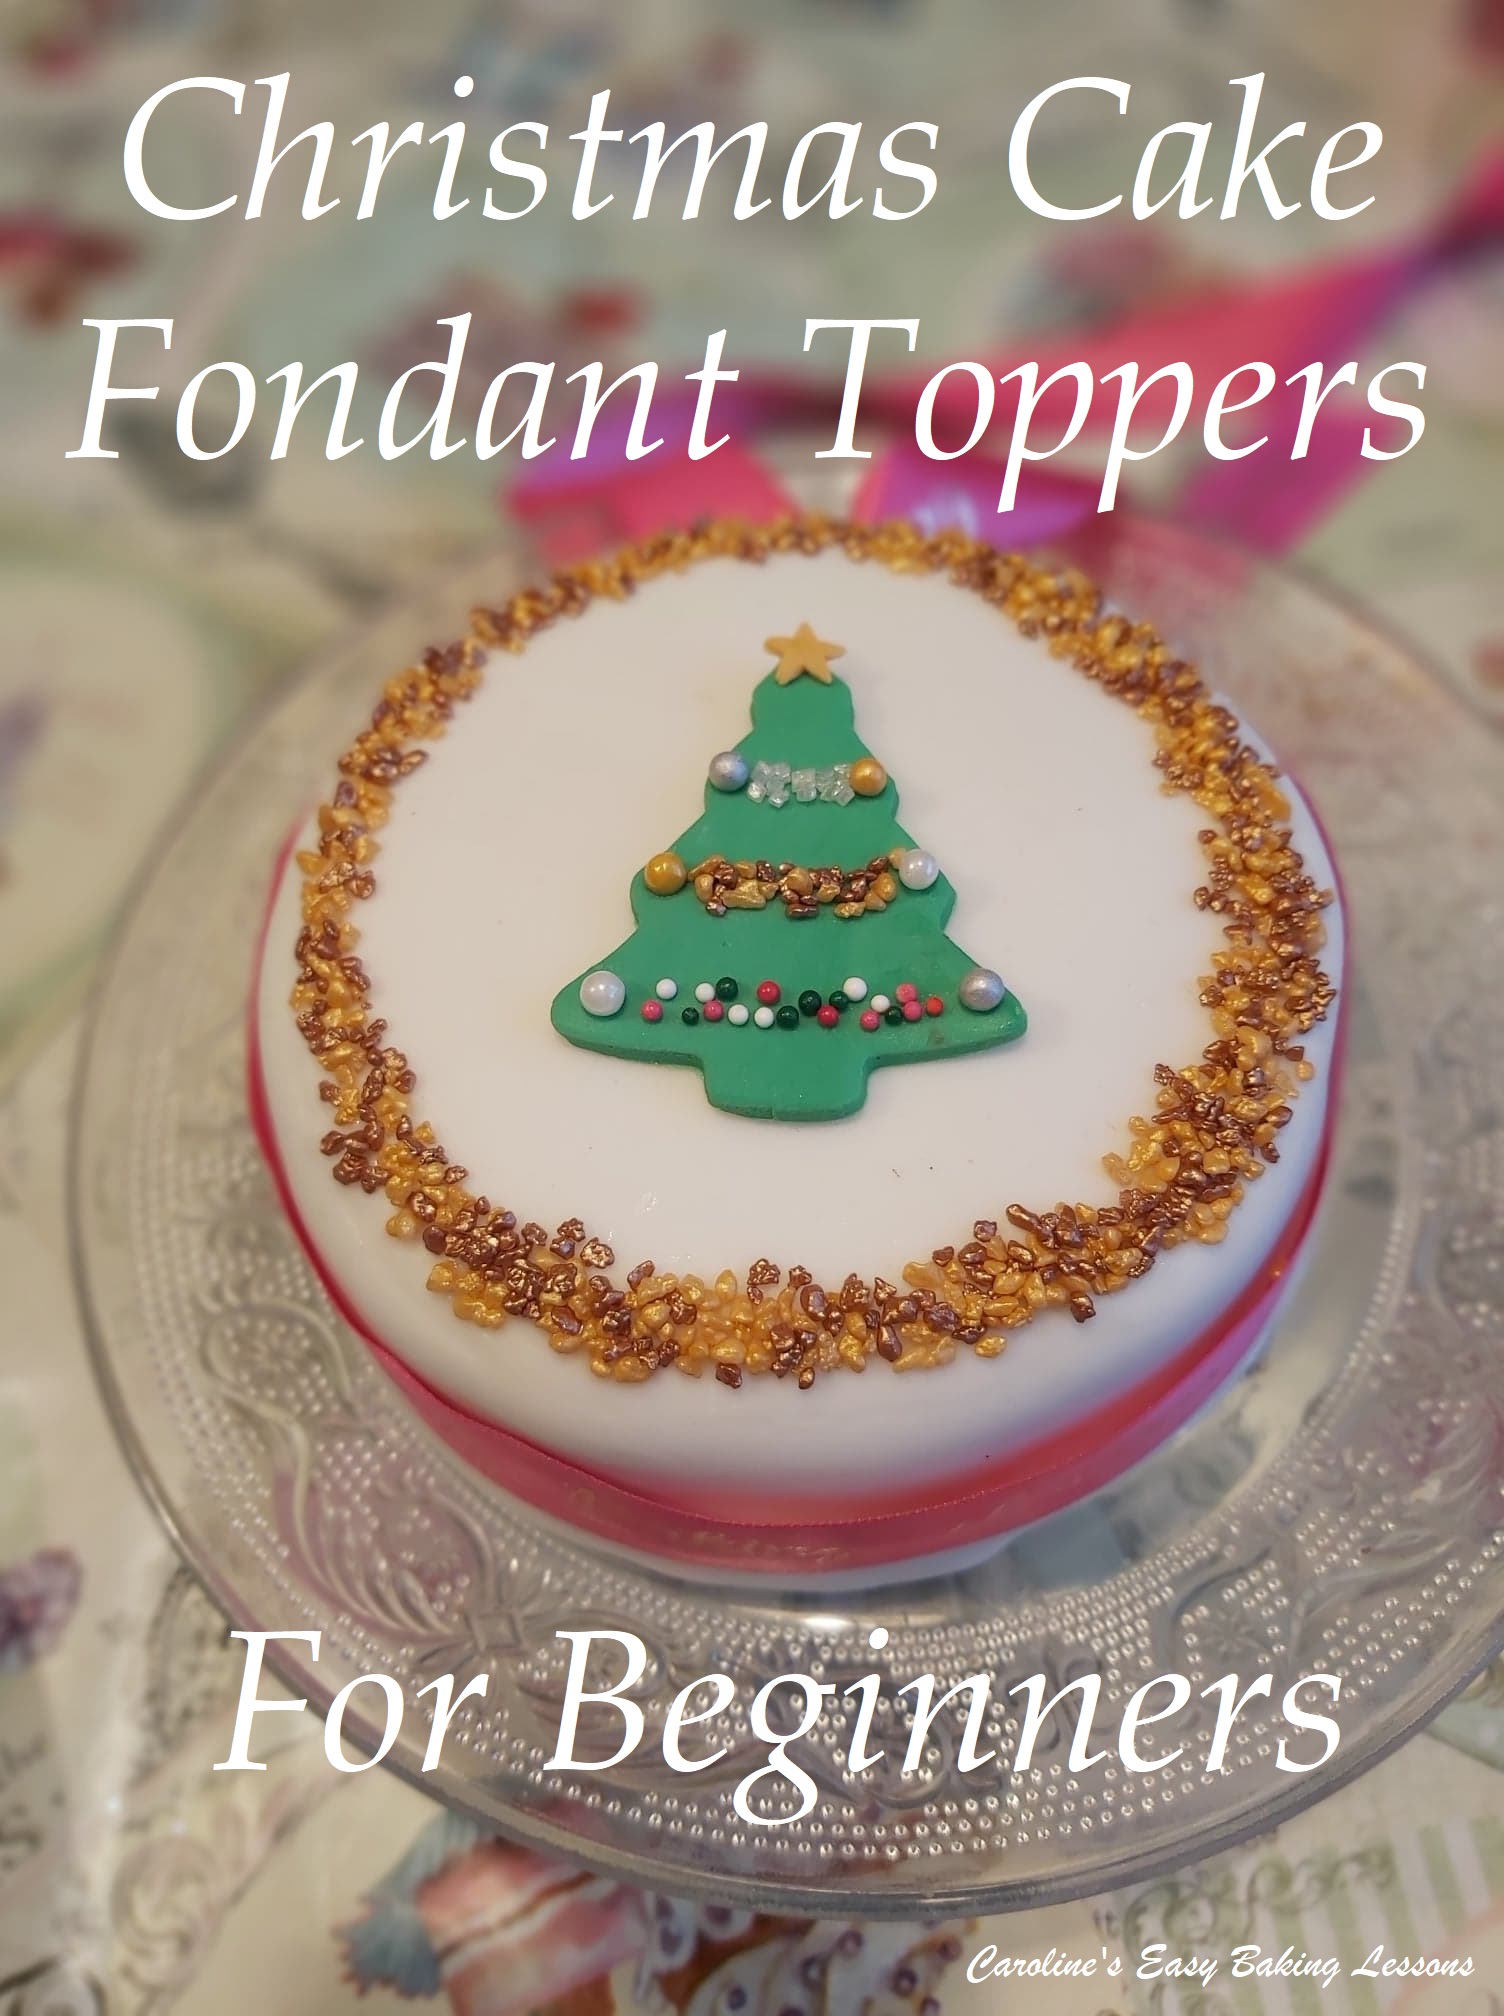 CHRISTMAS FONDANT TOPPER IDEAS – Part 6 In Traditional Christmas Cake Bake-together